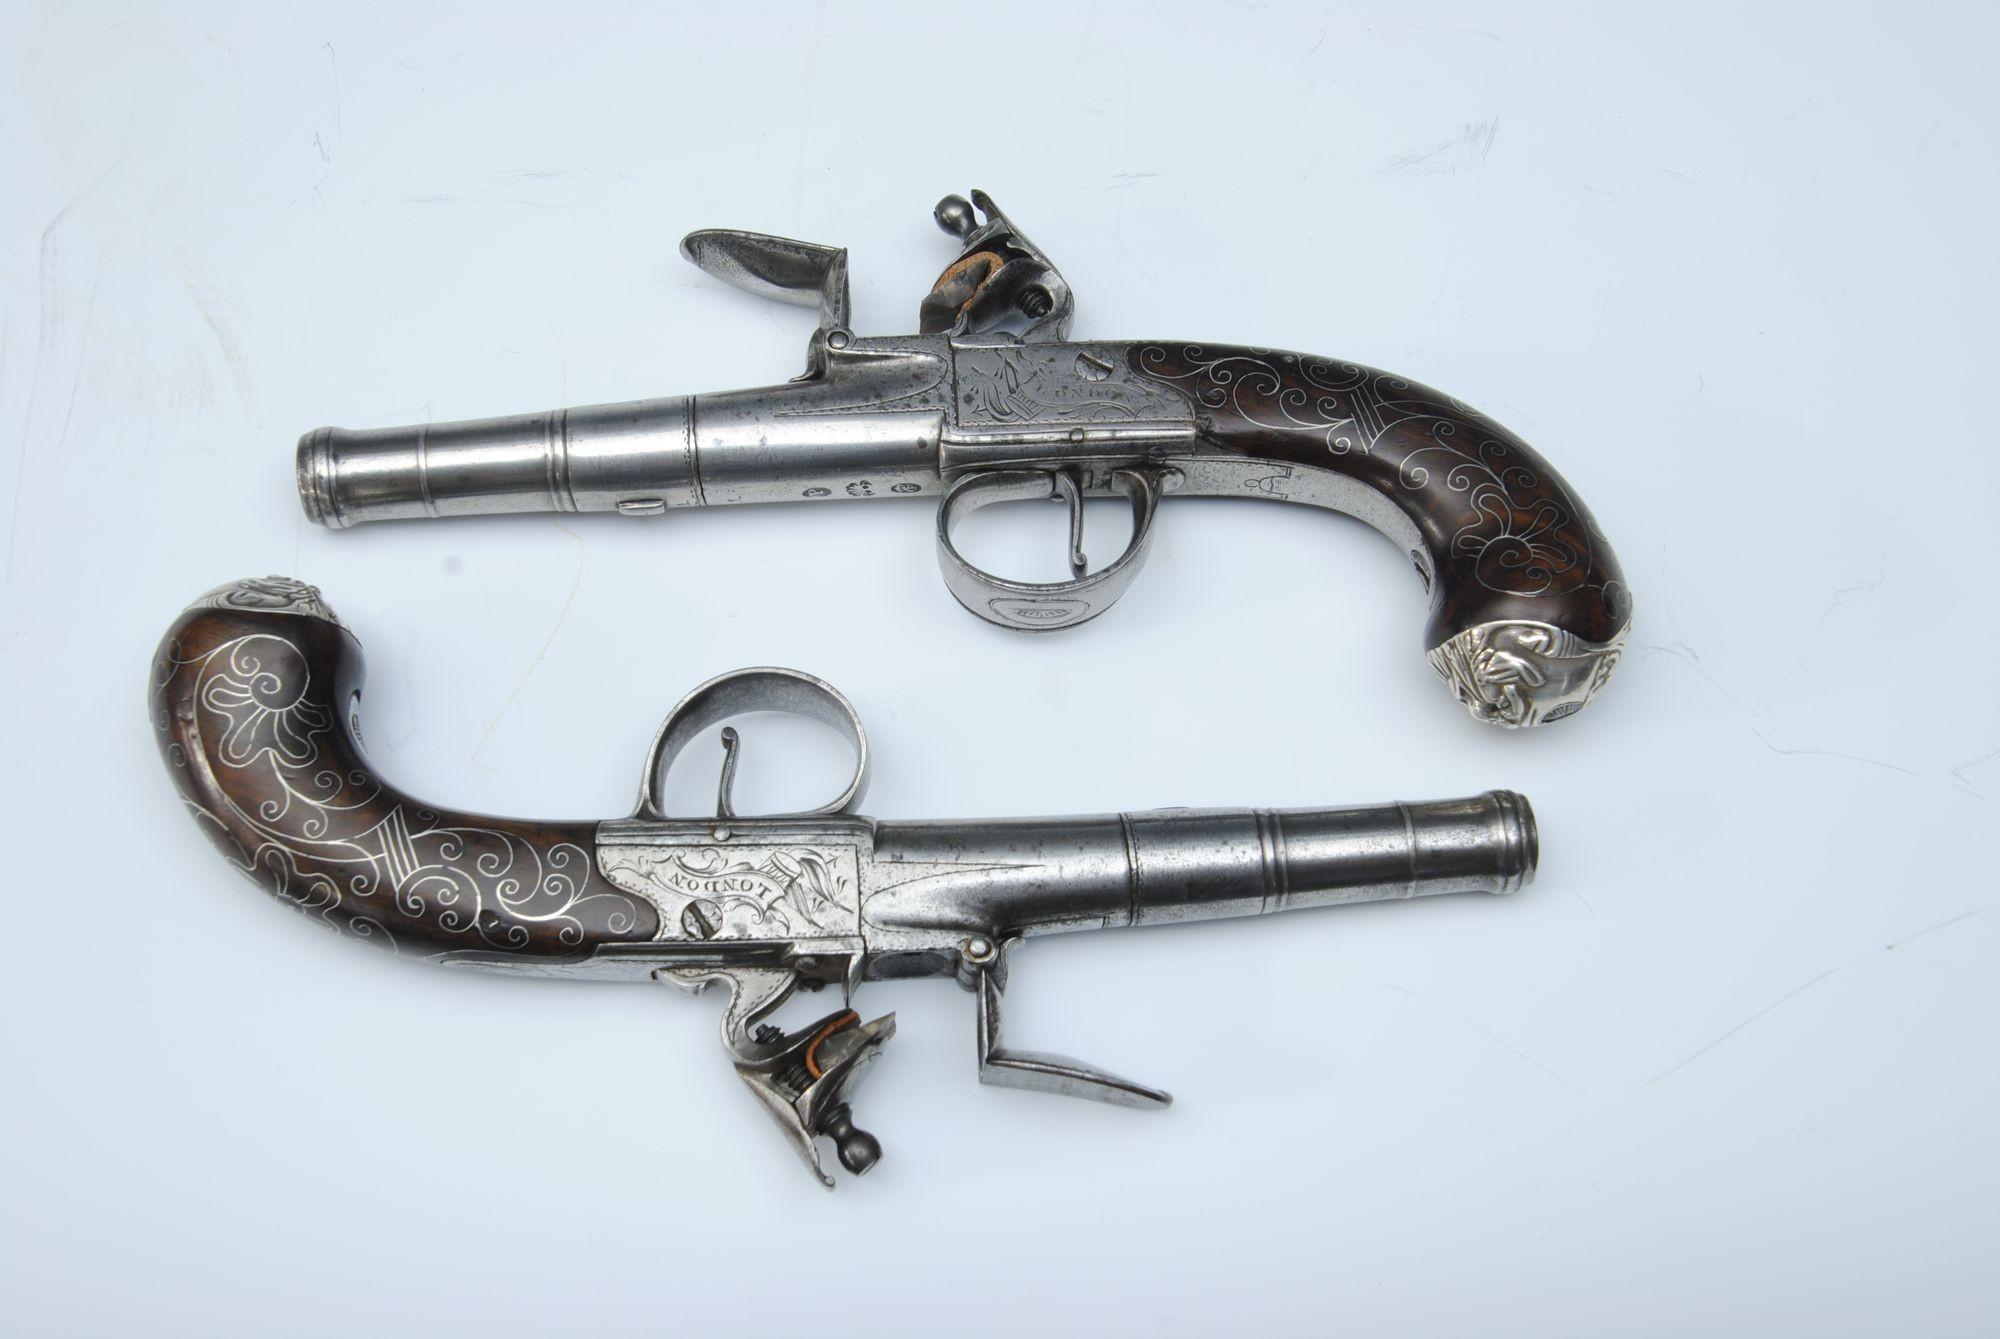 A pair of 18th century 50-bore turn-off cannon barrel pistols by Turvey, London with silver butt mounts and wire inlays.
Barrel length 8 cm